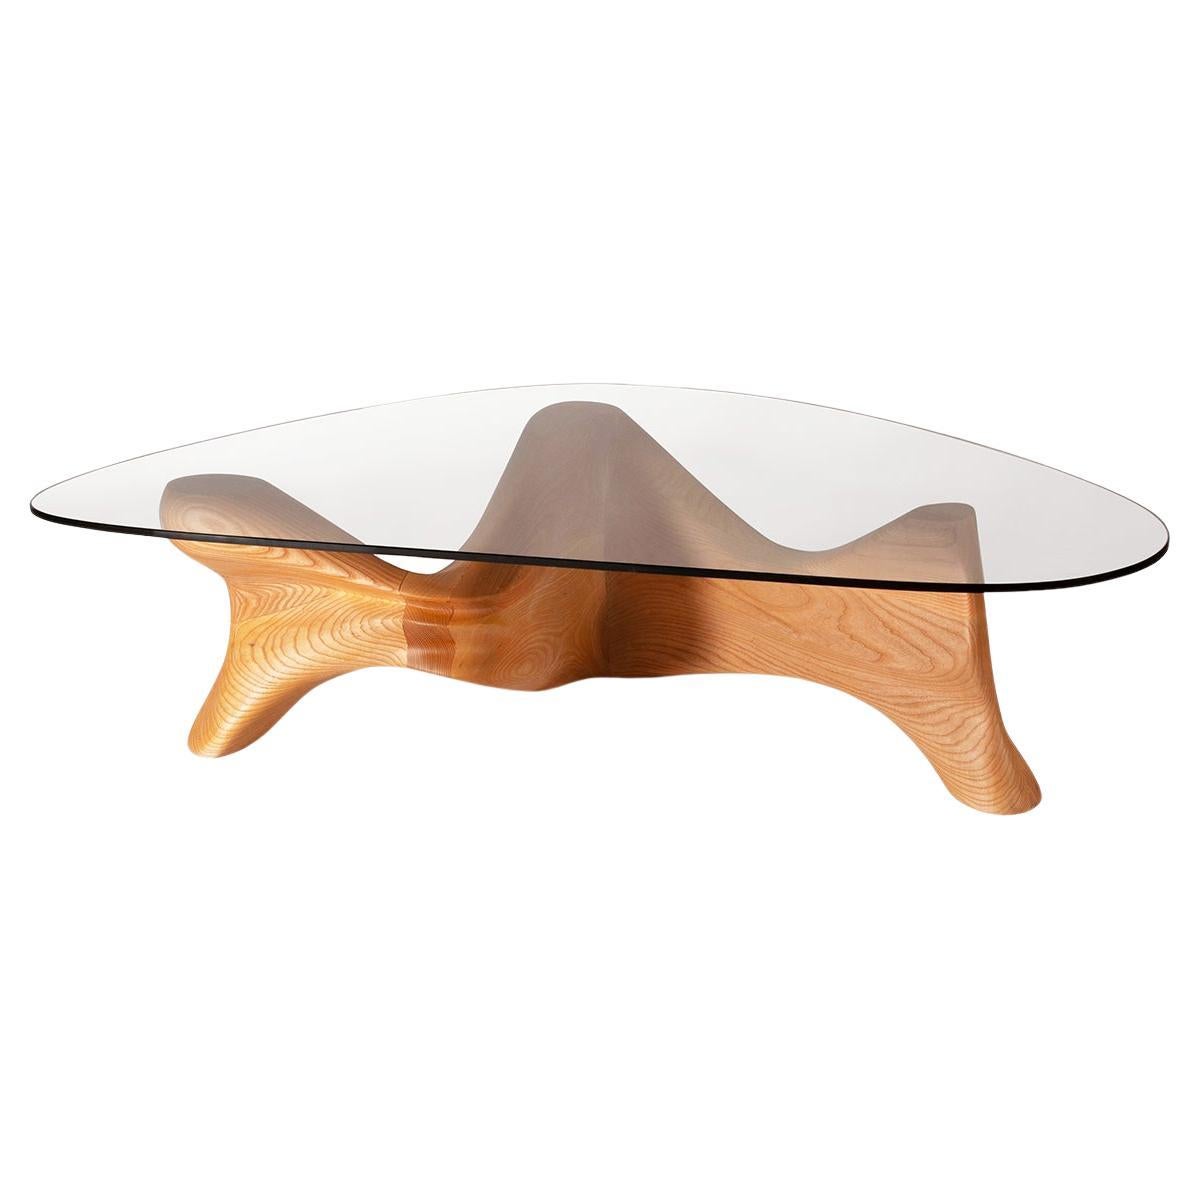 Amorph Zen Modern Coffee Table in Solid Wood with Honey Stain and Glass